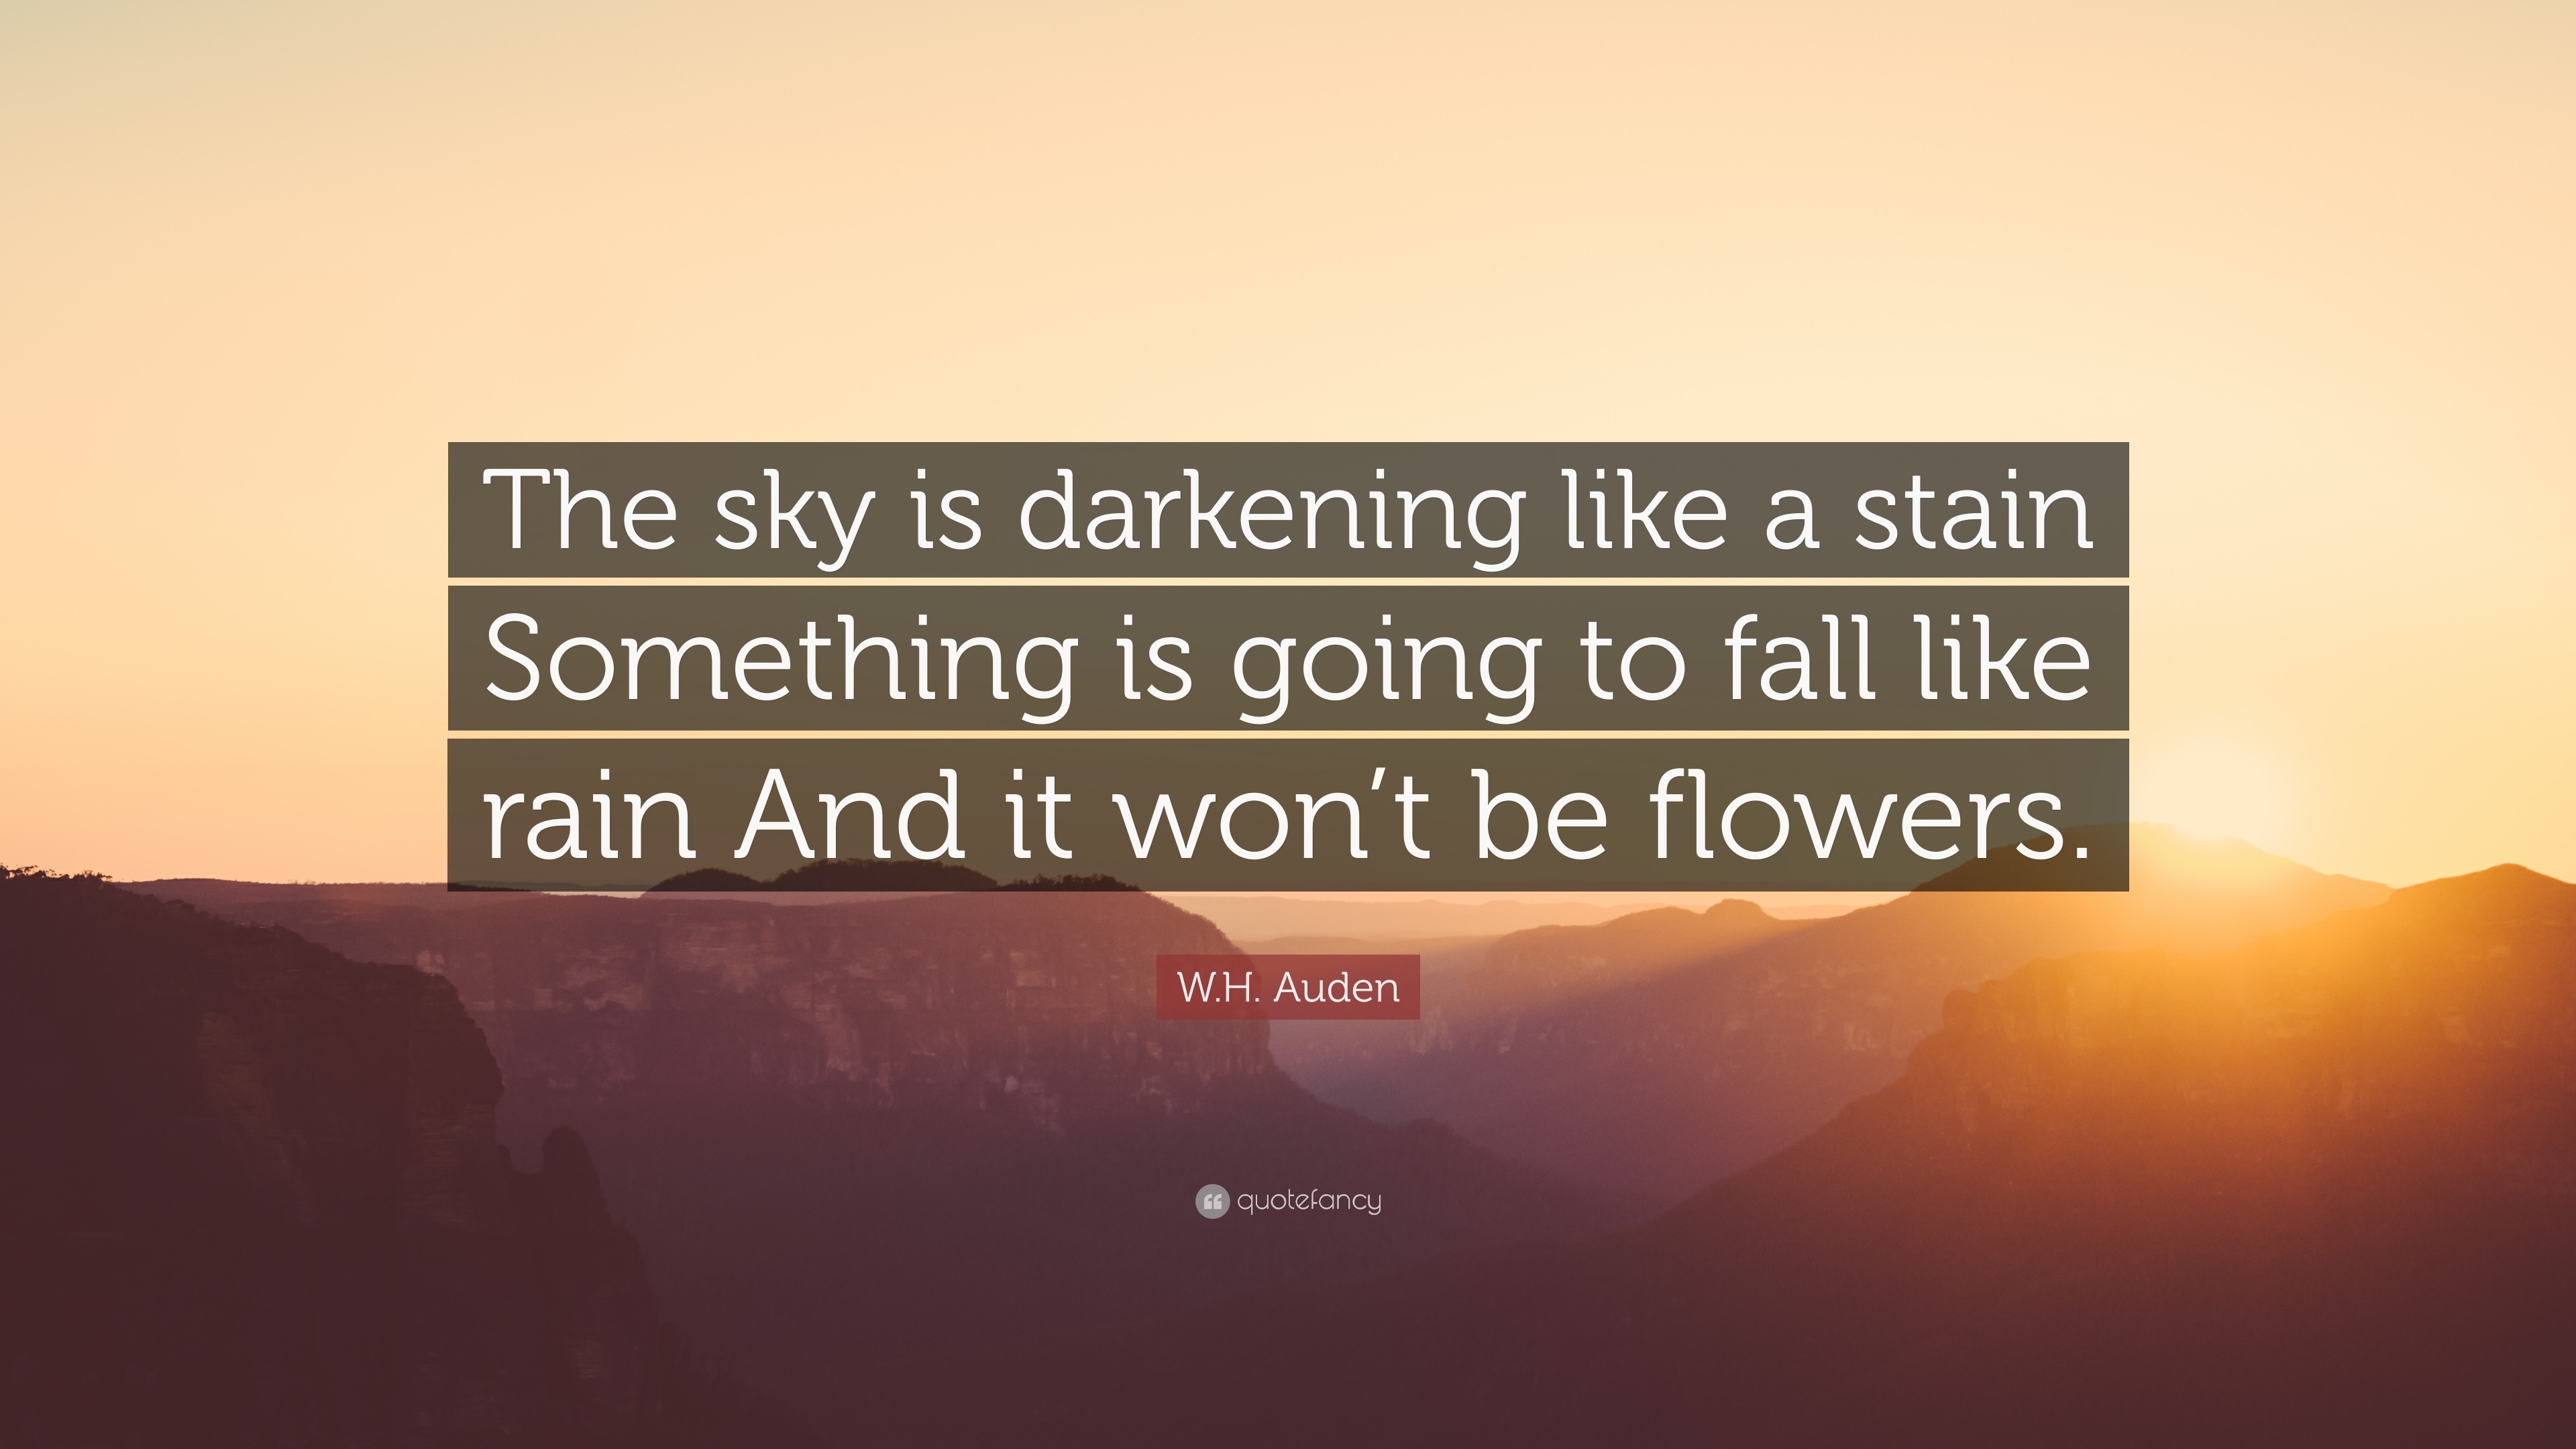 W.H. Auden Quote: “The sky is darkening like a stain Something is